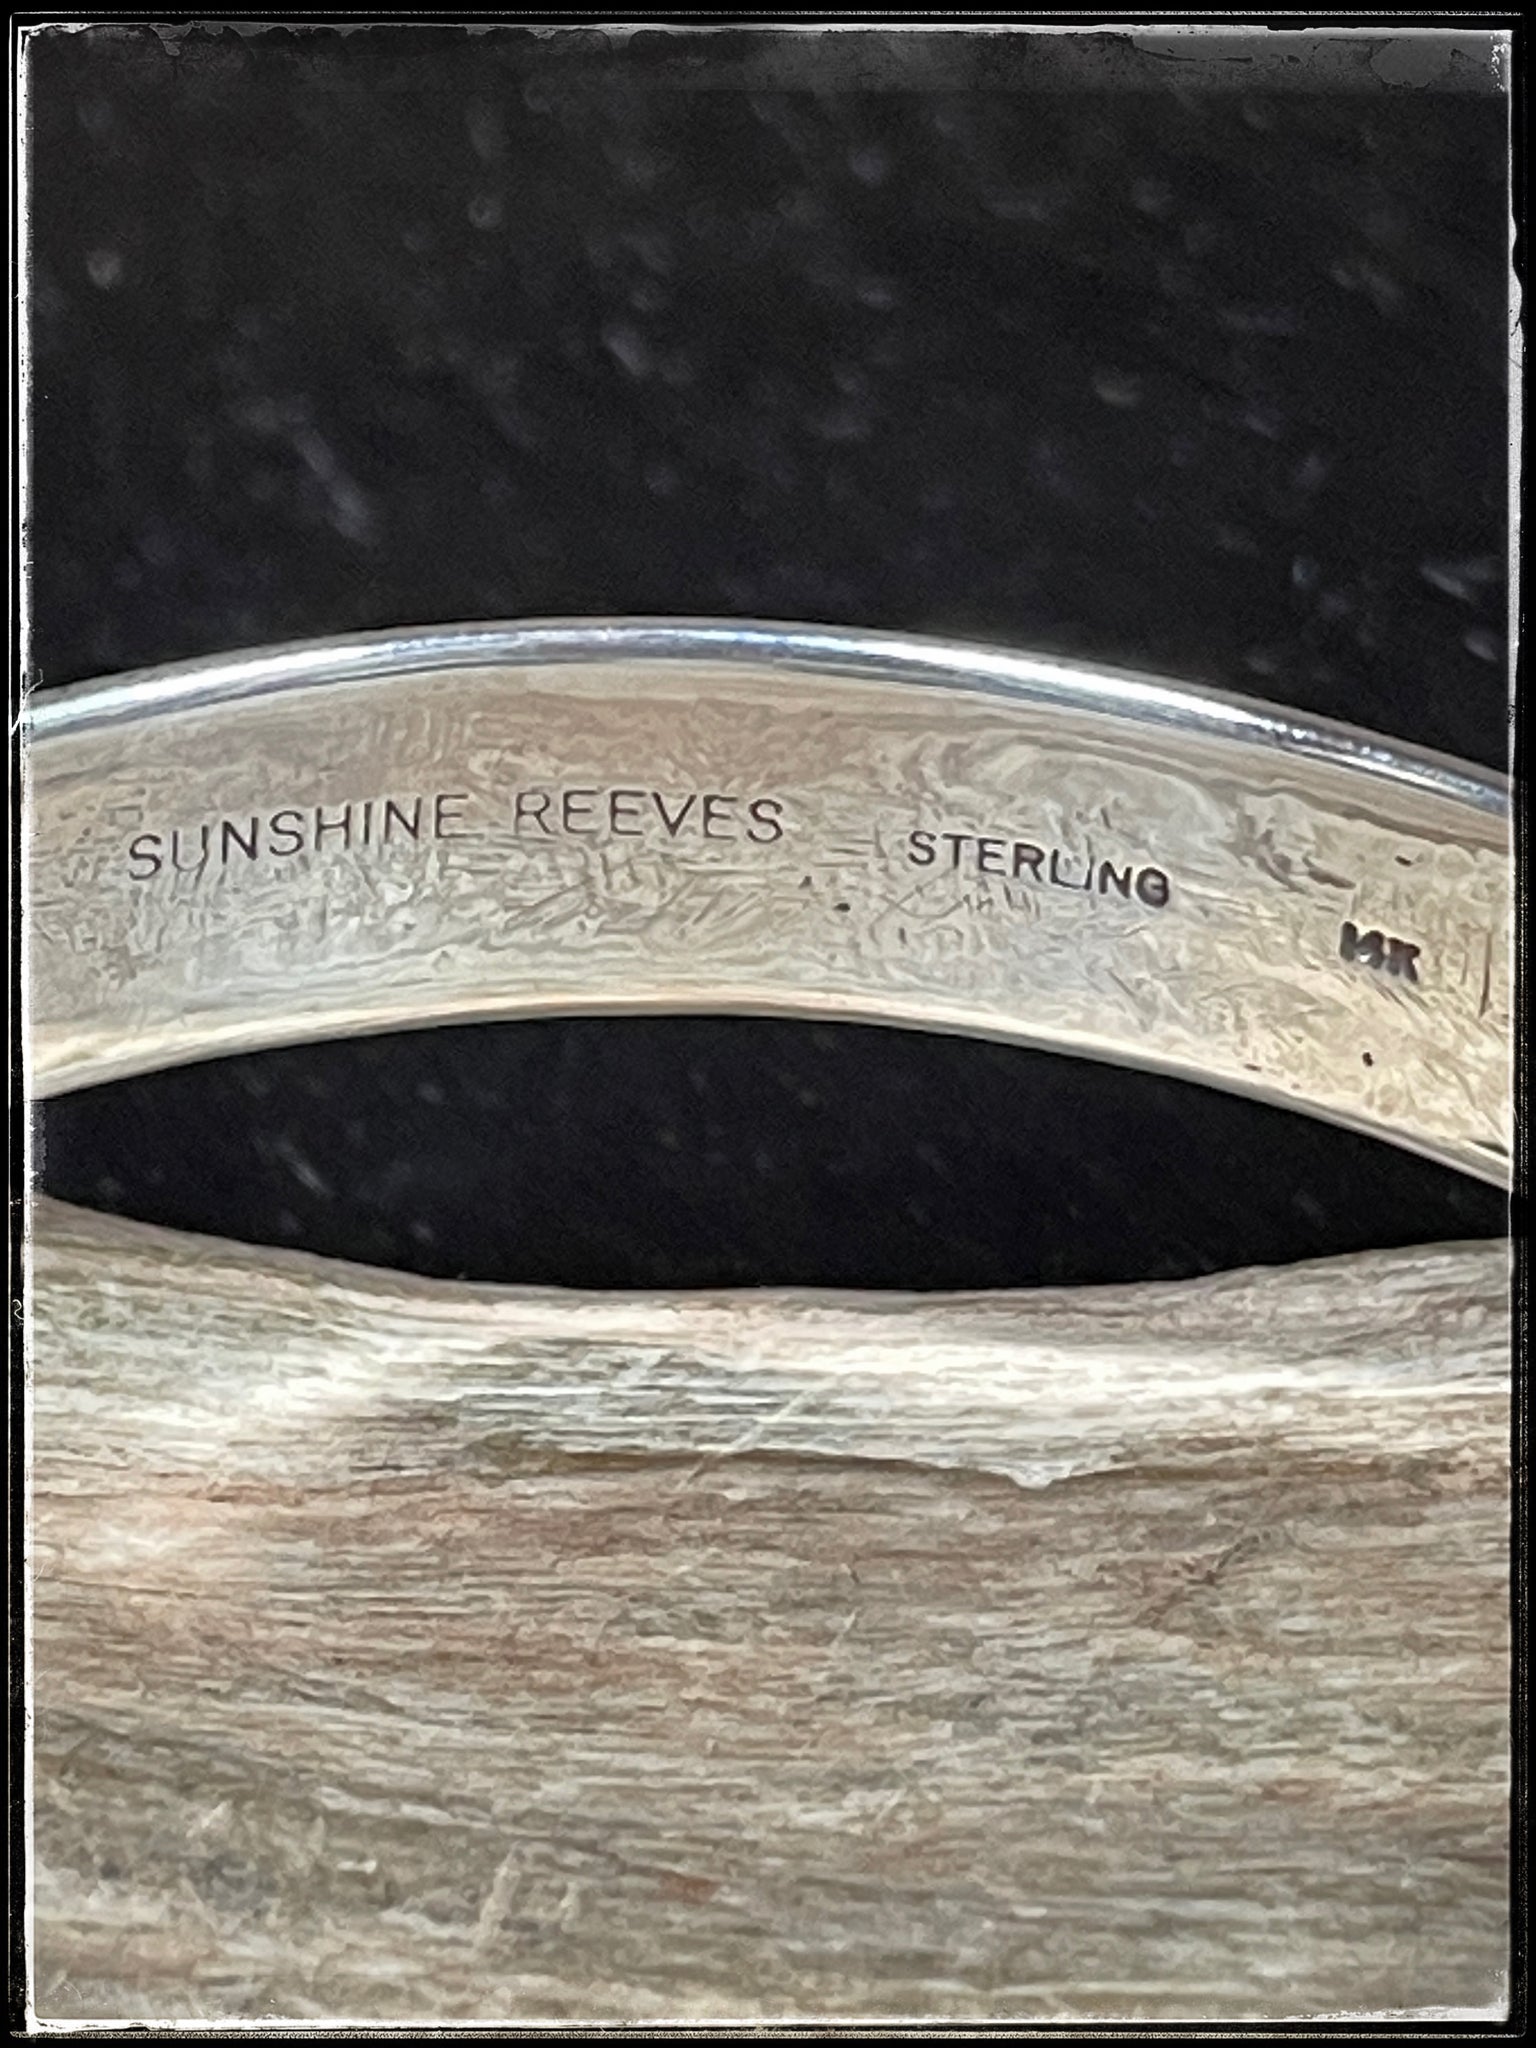 Sunshine Reeves Sterling Silver with 14K Gold Overlay Cuff